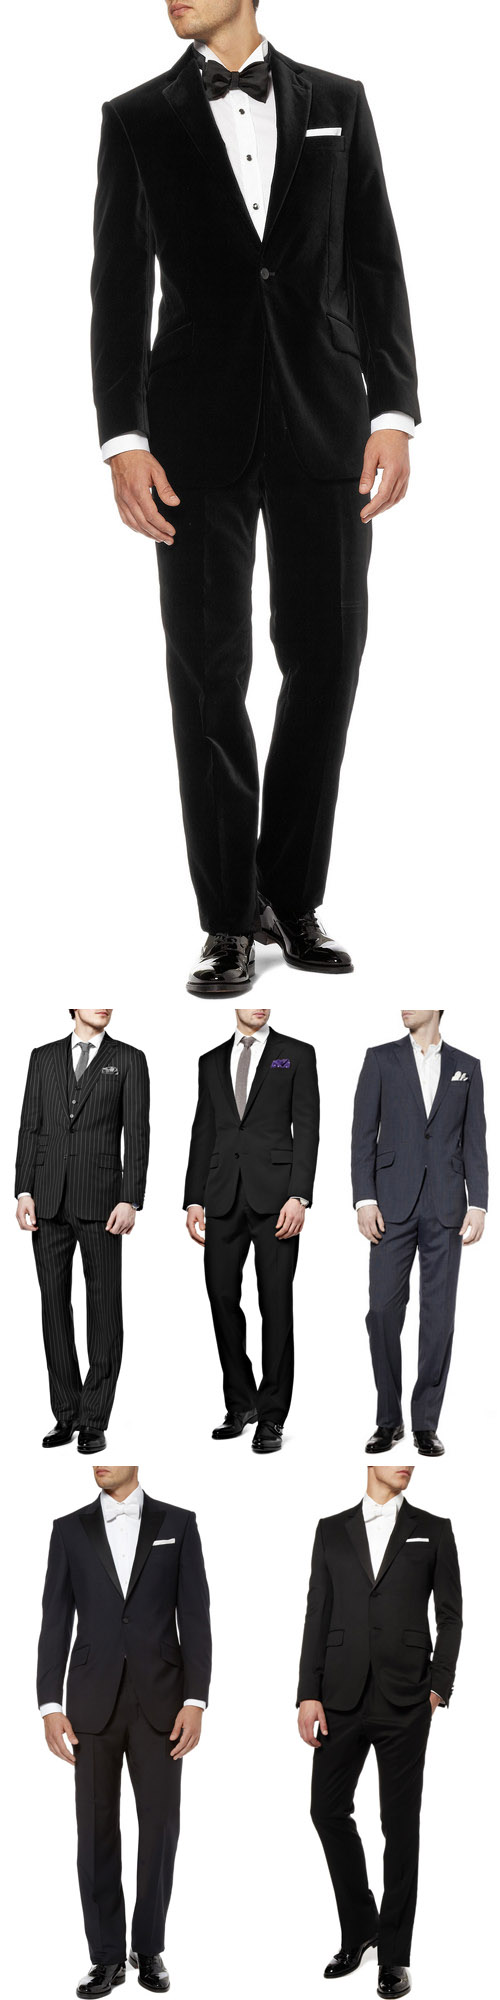 designer men's wear and wedding suites, tuxedos and accessories from Mr. Porter, Net-a-Porter.com's men's store